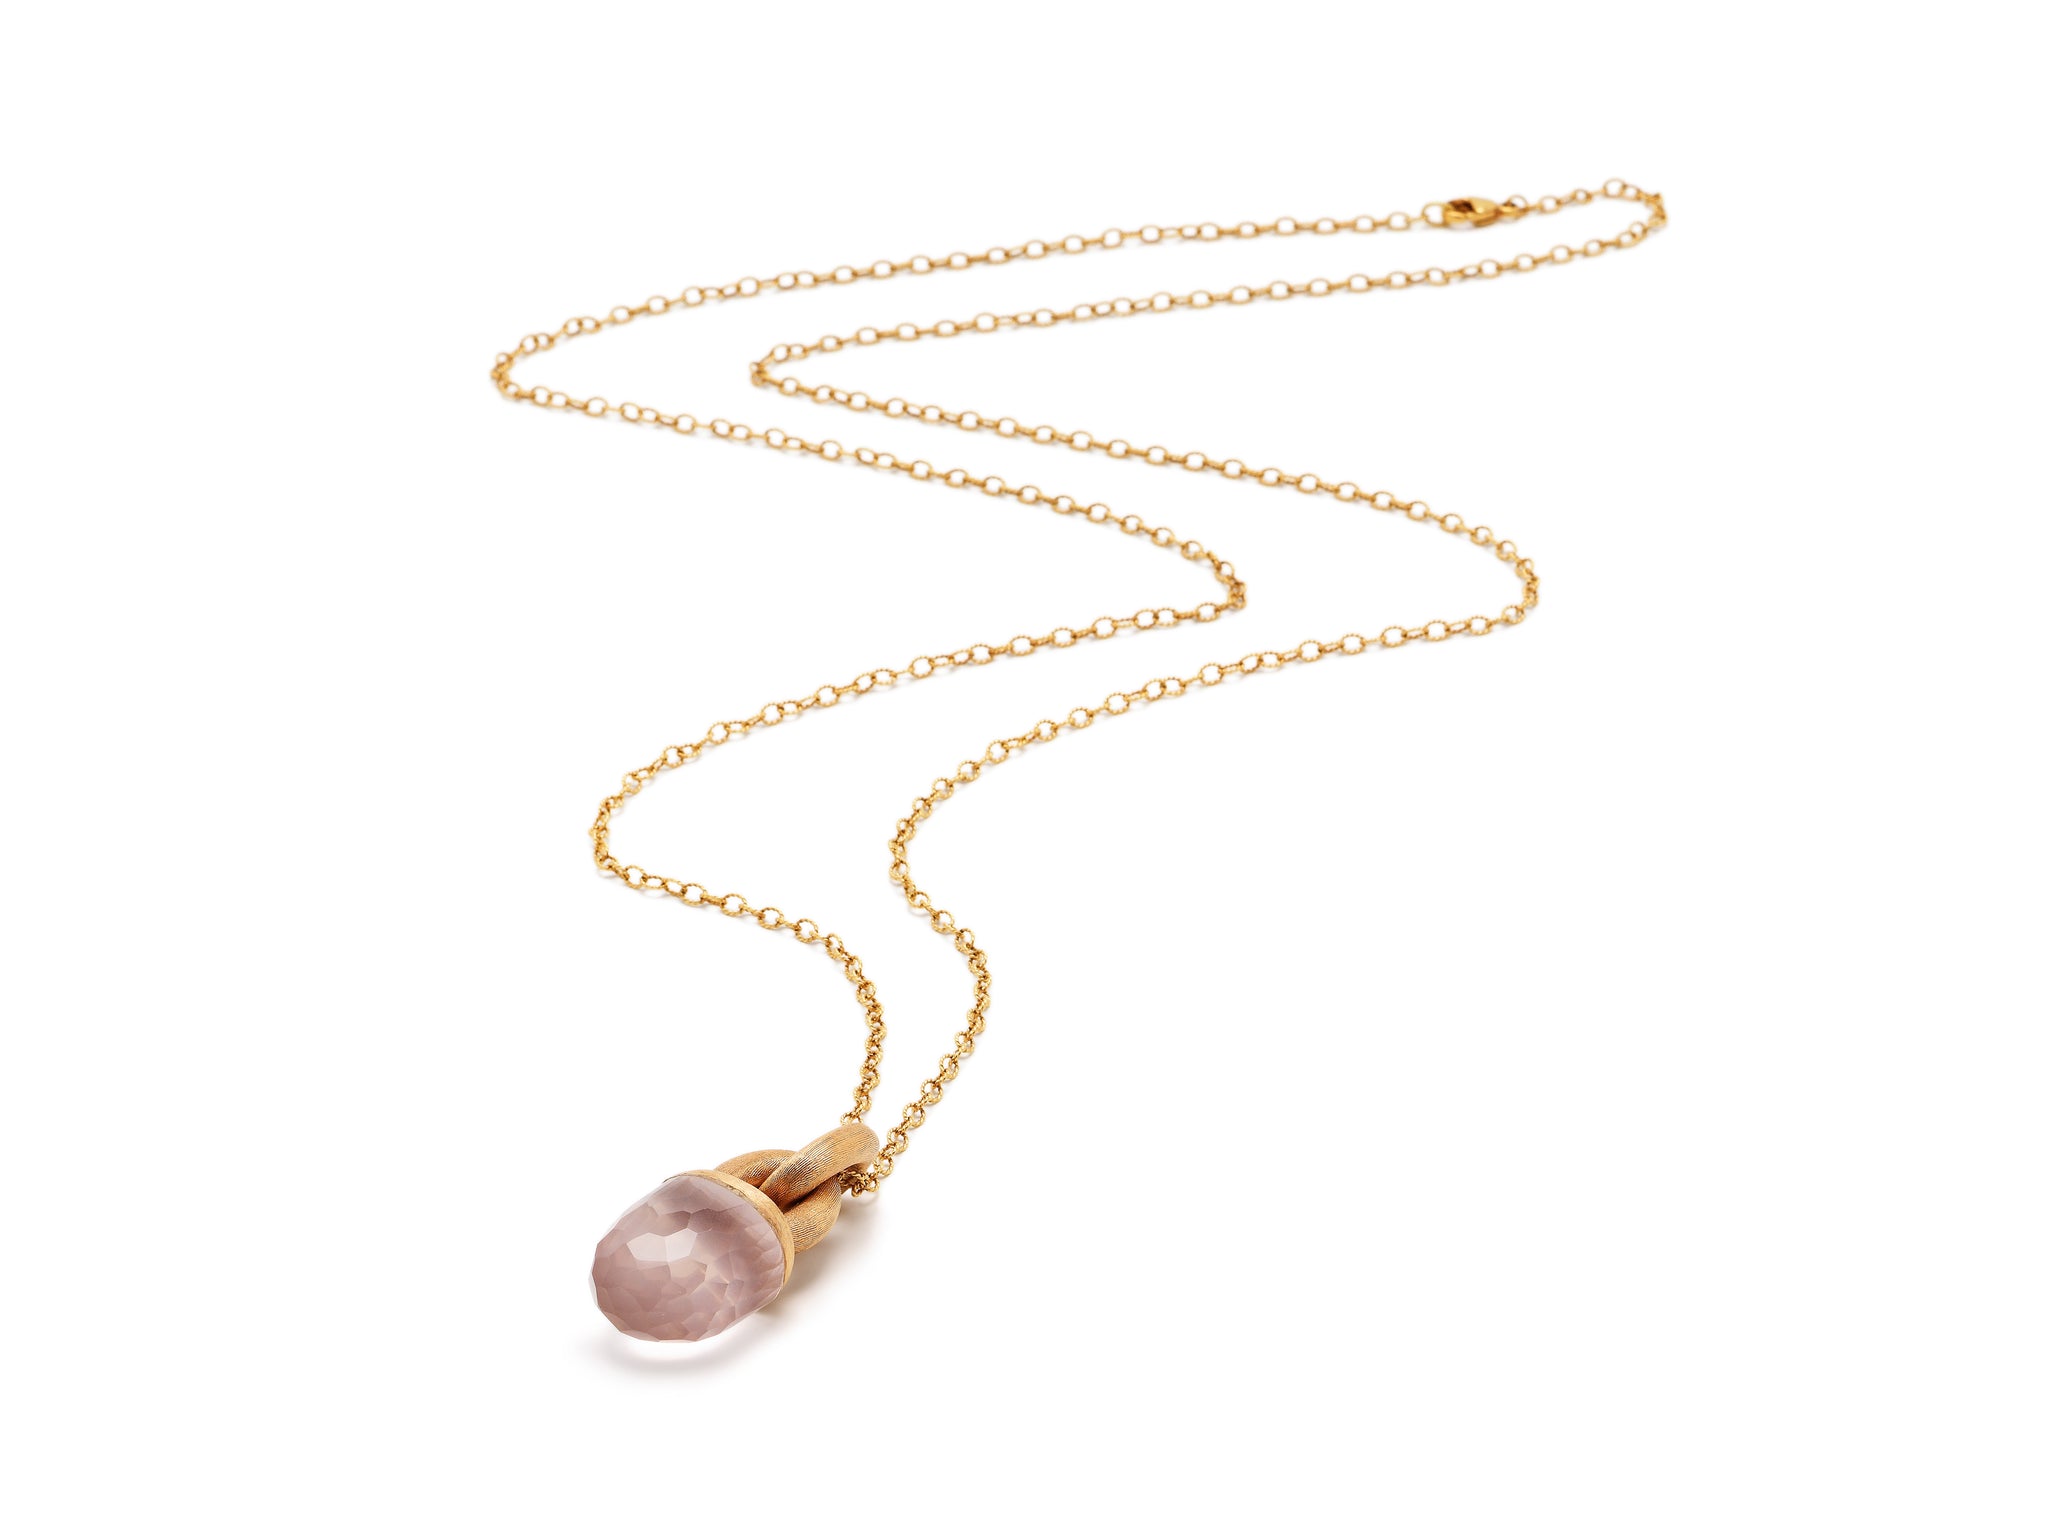 18 krt red gold necklace with pendant of faceted-cut rose quartz in a red gold matted case